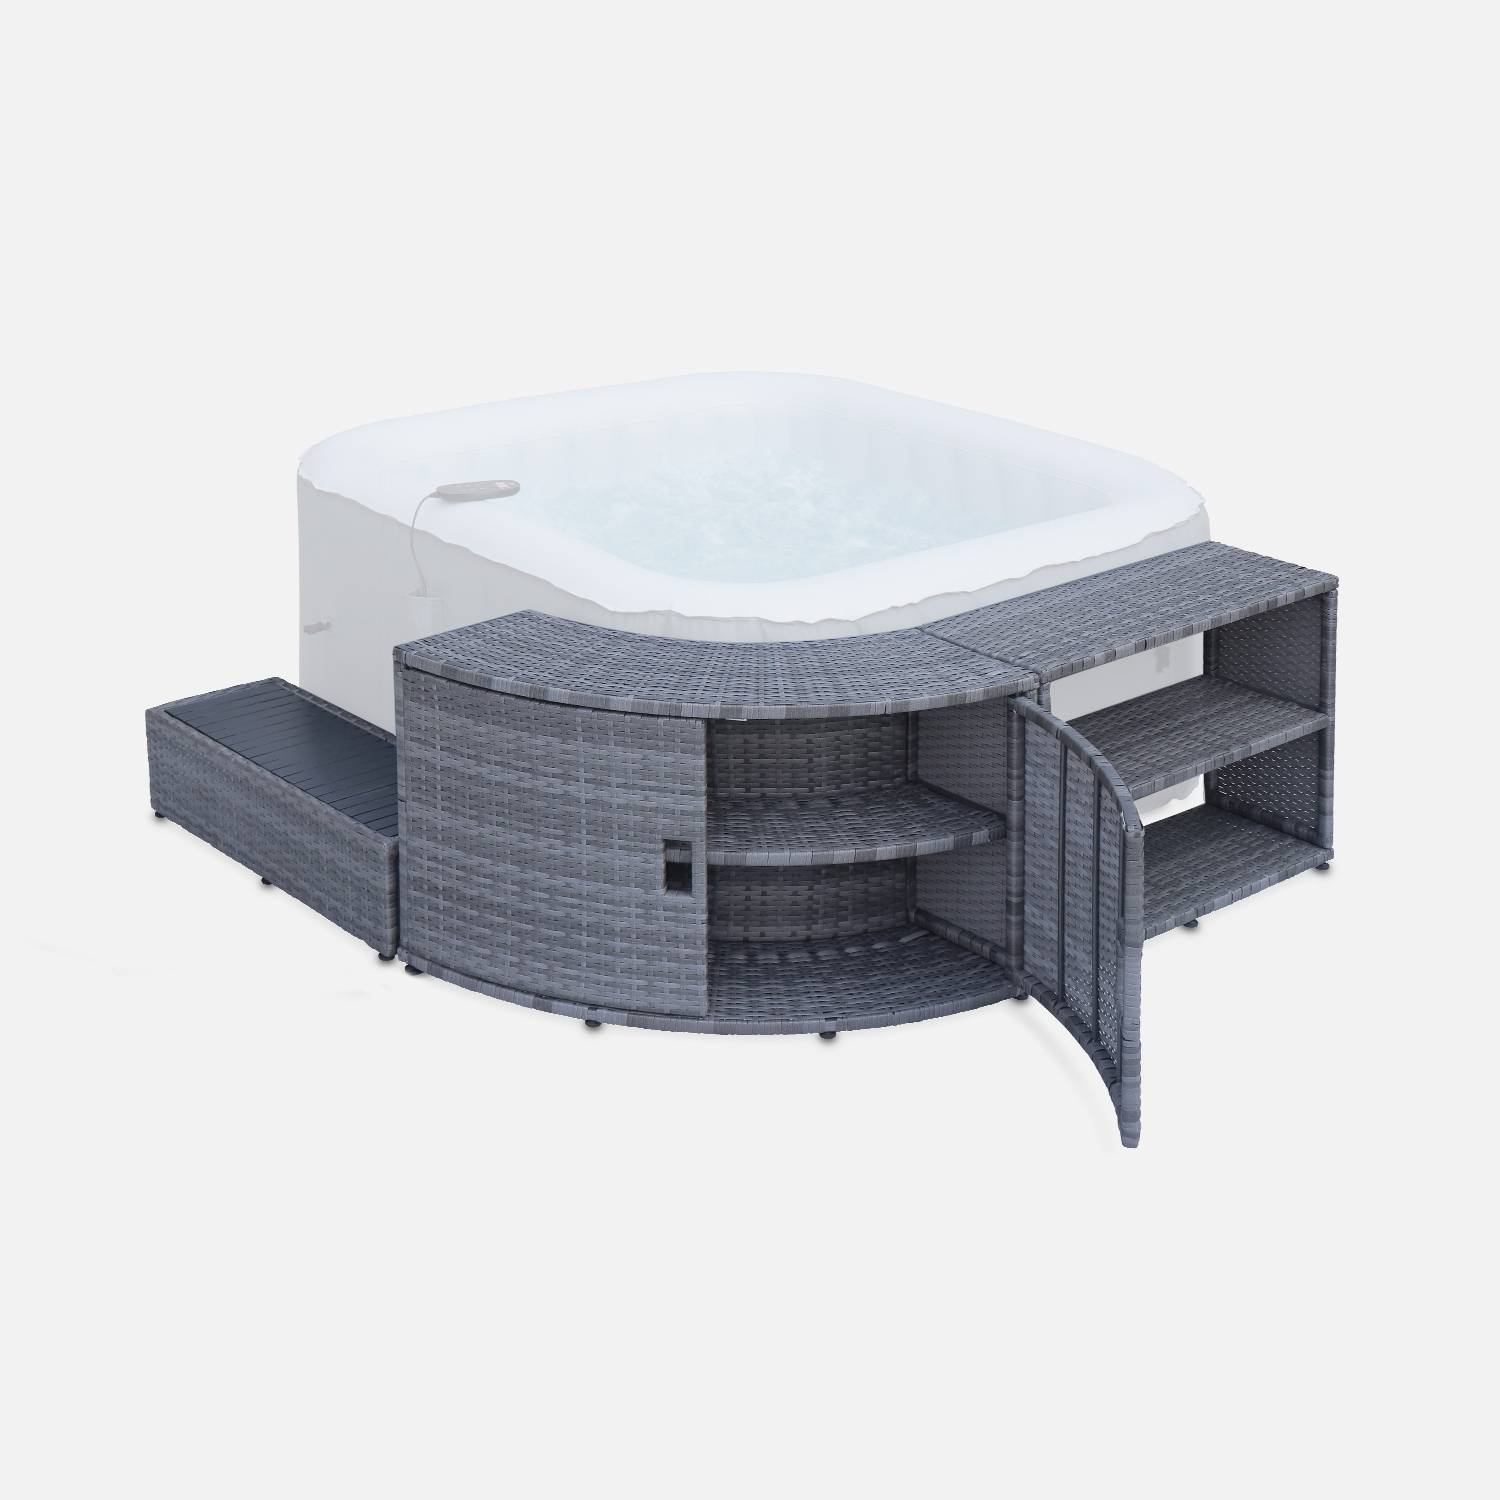 Grey polyrattan surround for square hot tub with cabinet, shelf and footstep,sweeek,Photo2